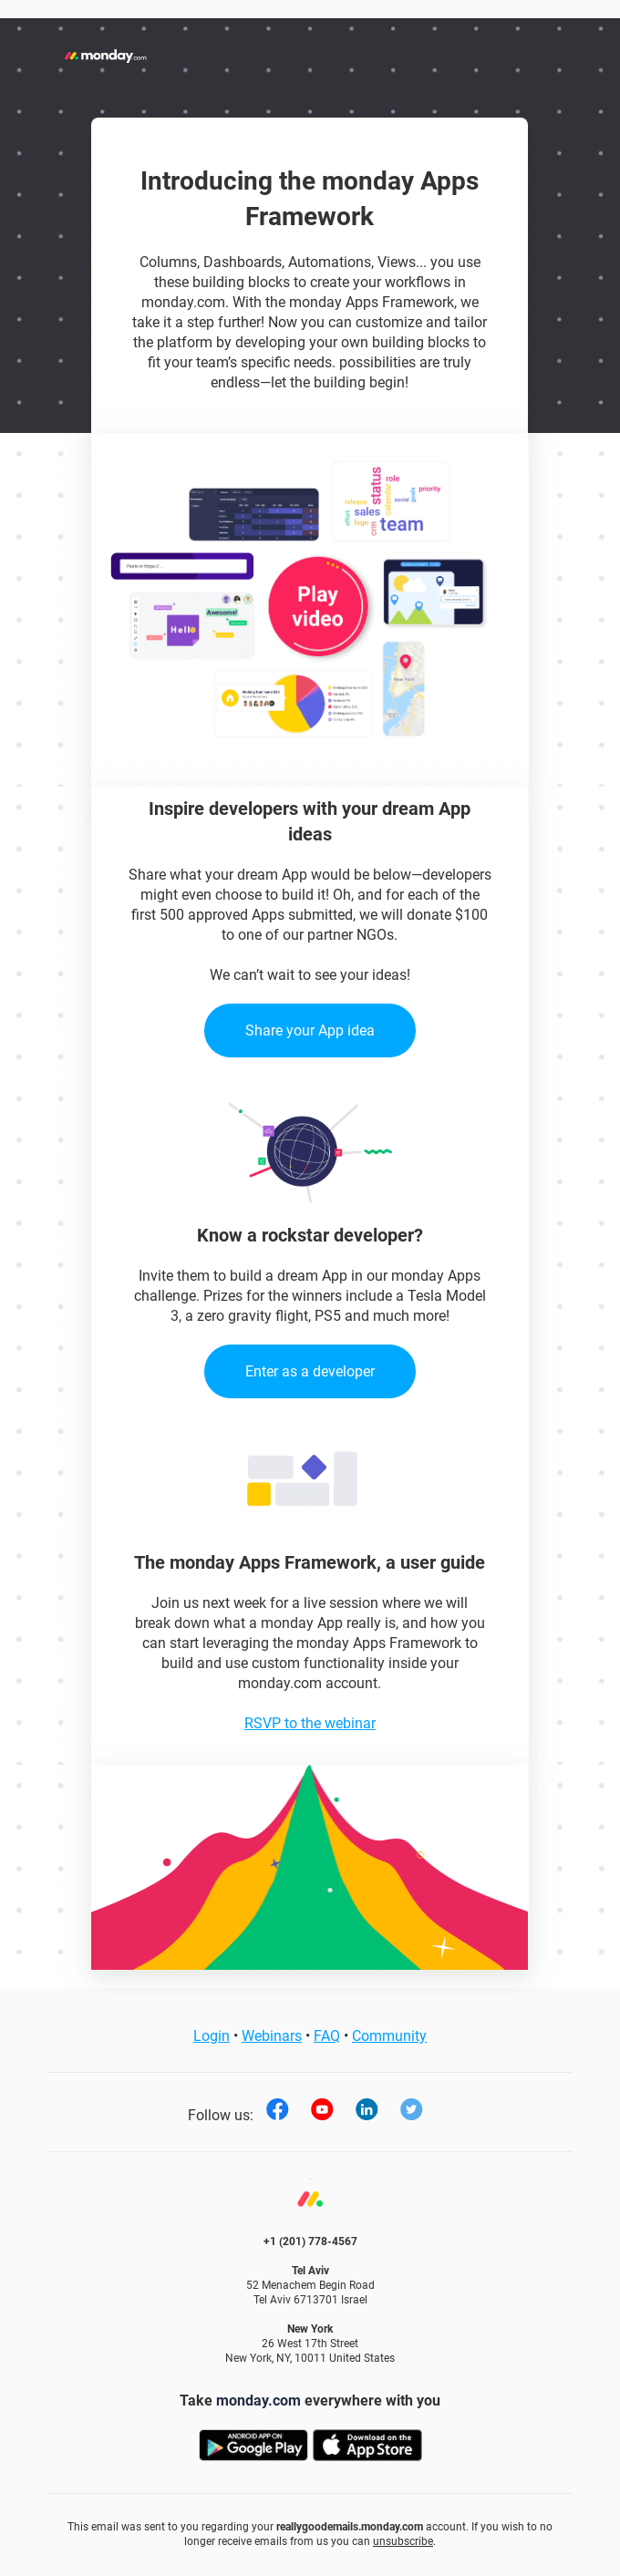 This is huge: you can now build your own monday Apps